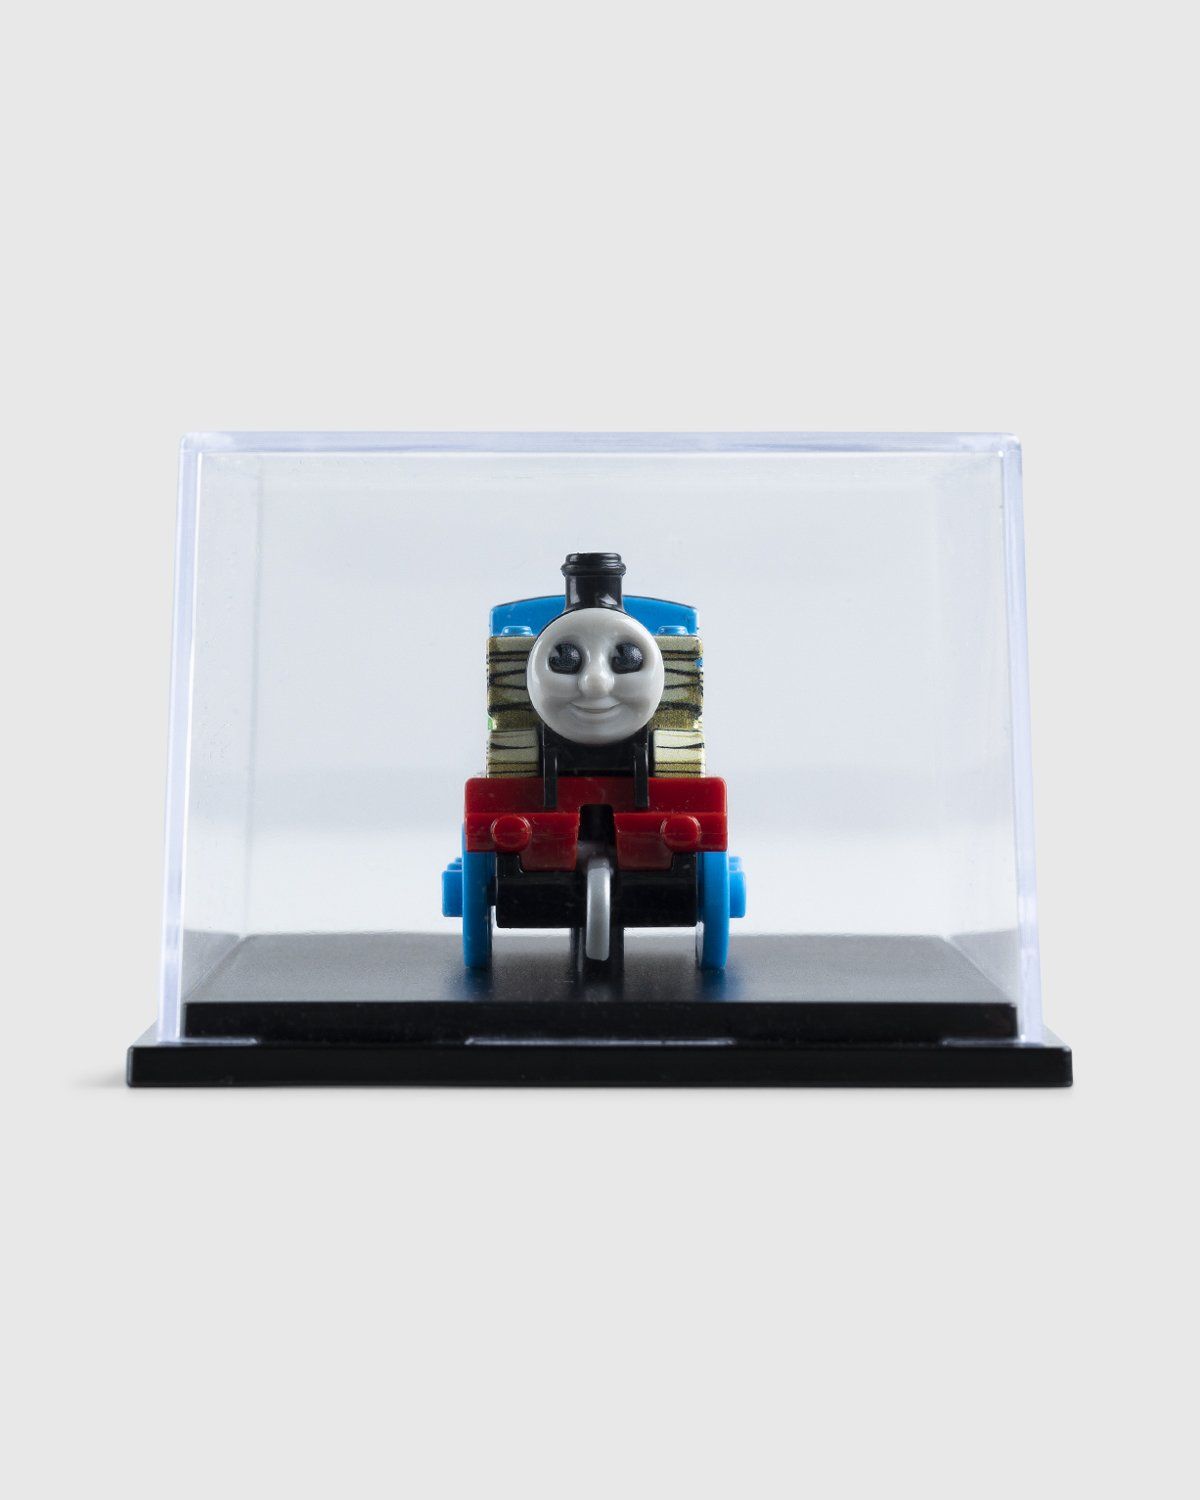 Mattel Creations x Blue the Great – Thomas the Tank Engine Diecast - Arts & Collectibles - Blue - Image 3